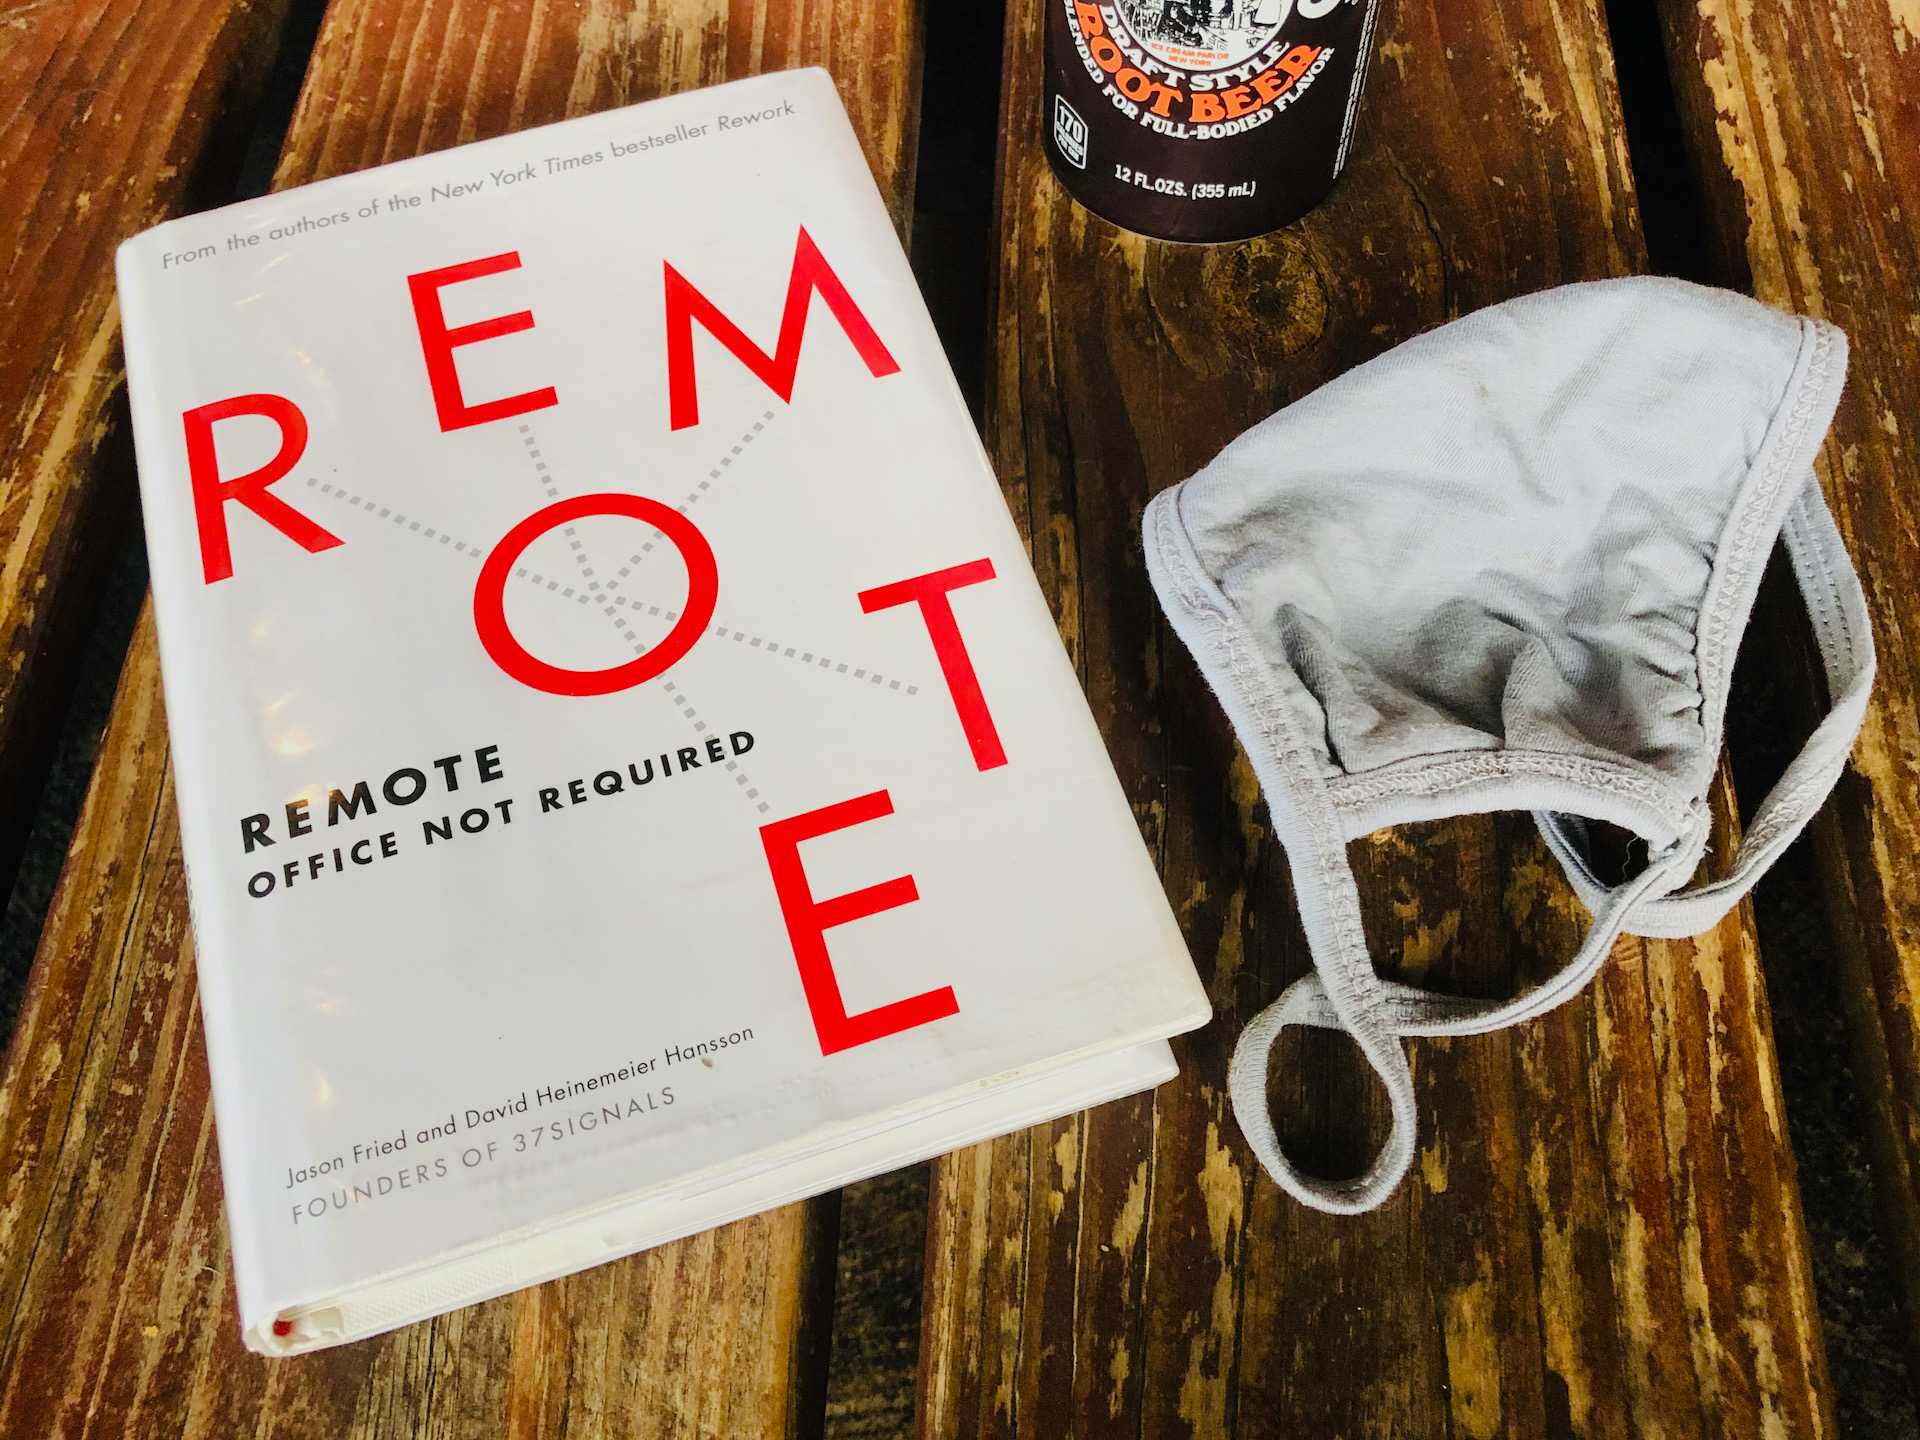 Remote: Office Not Required hardcopy book on a table and a gray cloth face mask to the right